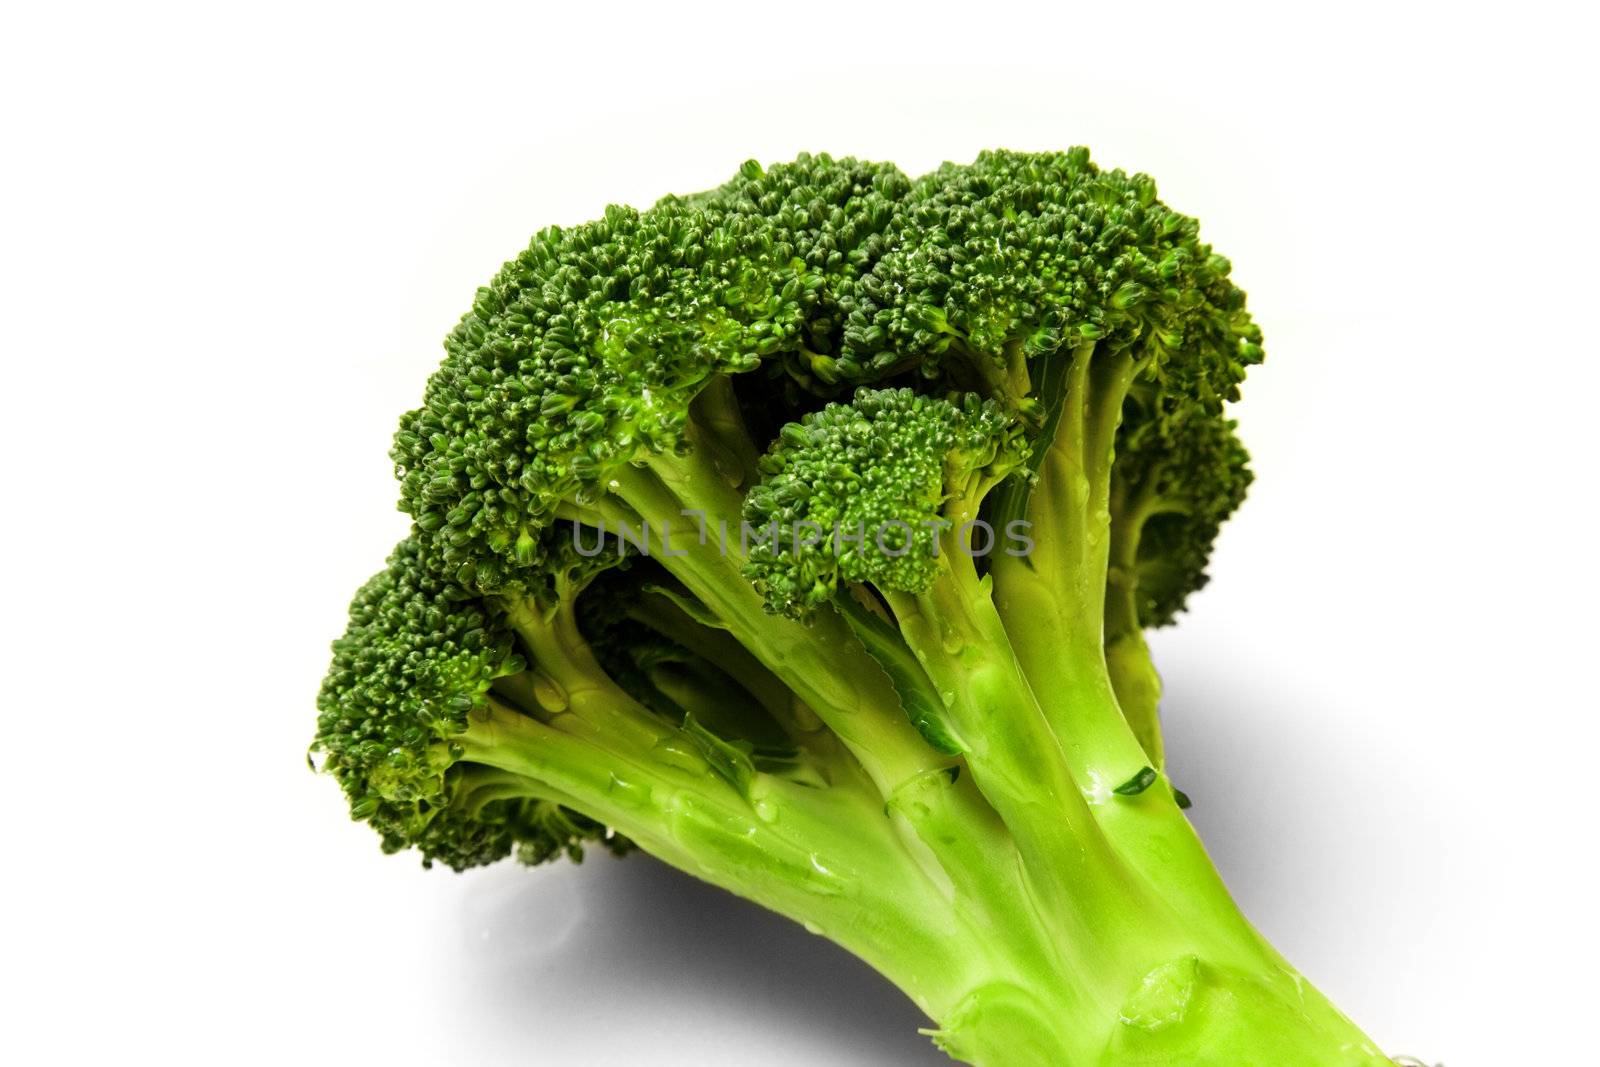 A fresh piece of broccoli against white